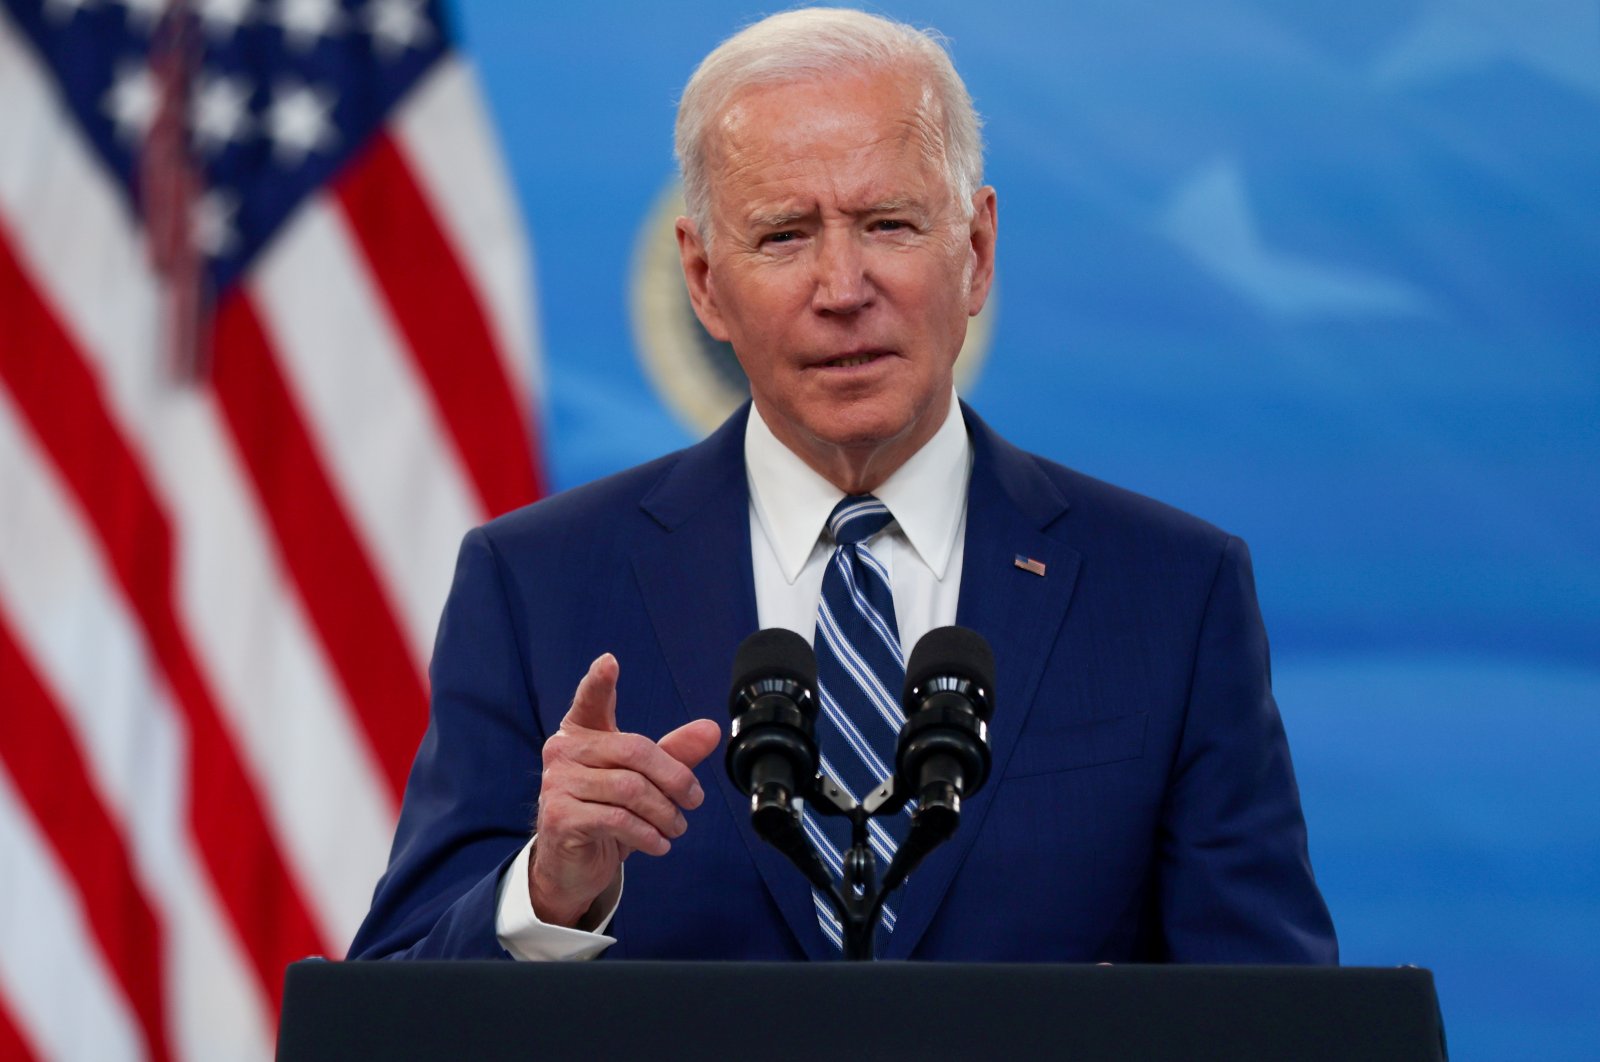 U.S. President Joe Biden delivers remarks after a meeting with his COVID-19 Response Team on the coronavirus pandemic and the state of vaccinations, on the White House campus in Washington, U.S., March 29, 2021. (Reuters Photo)